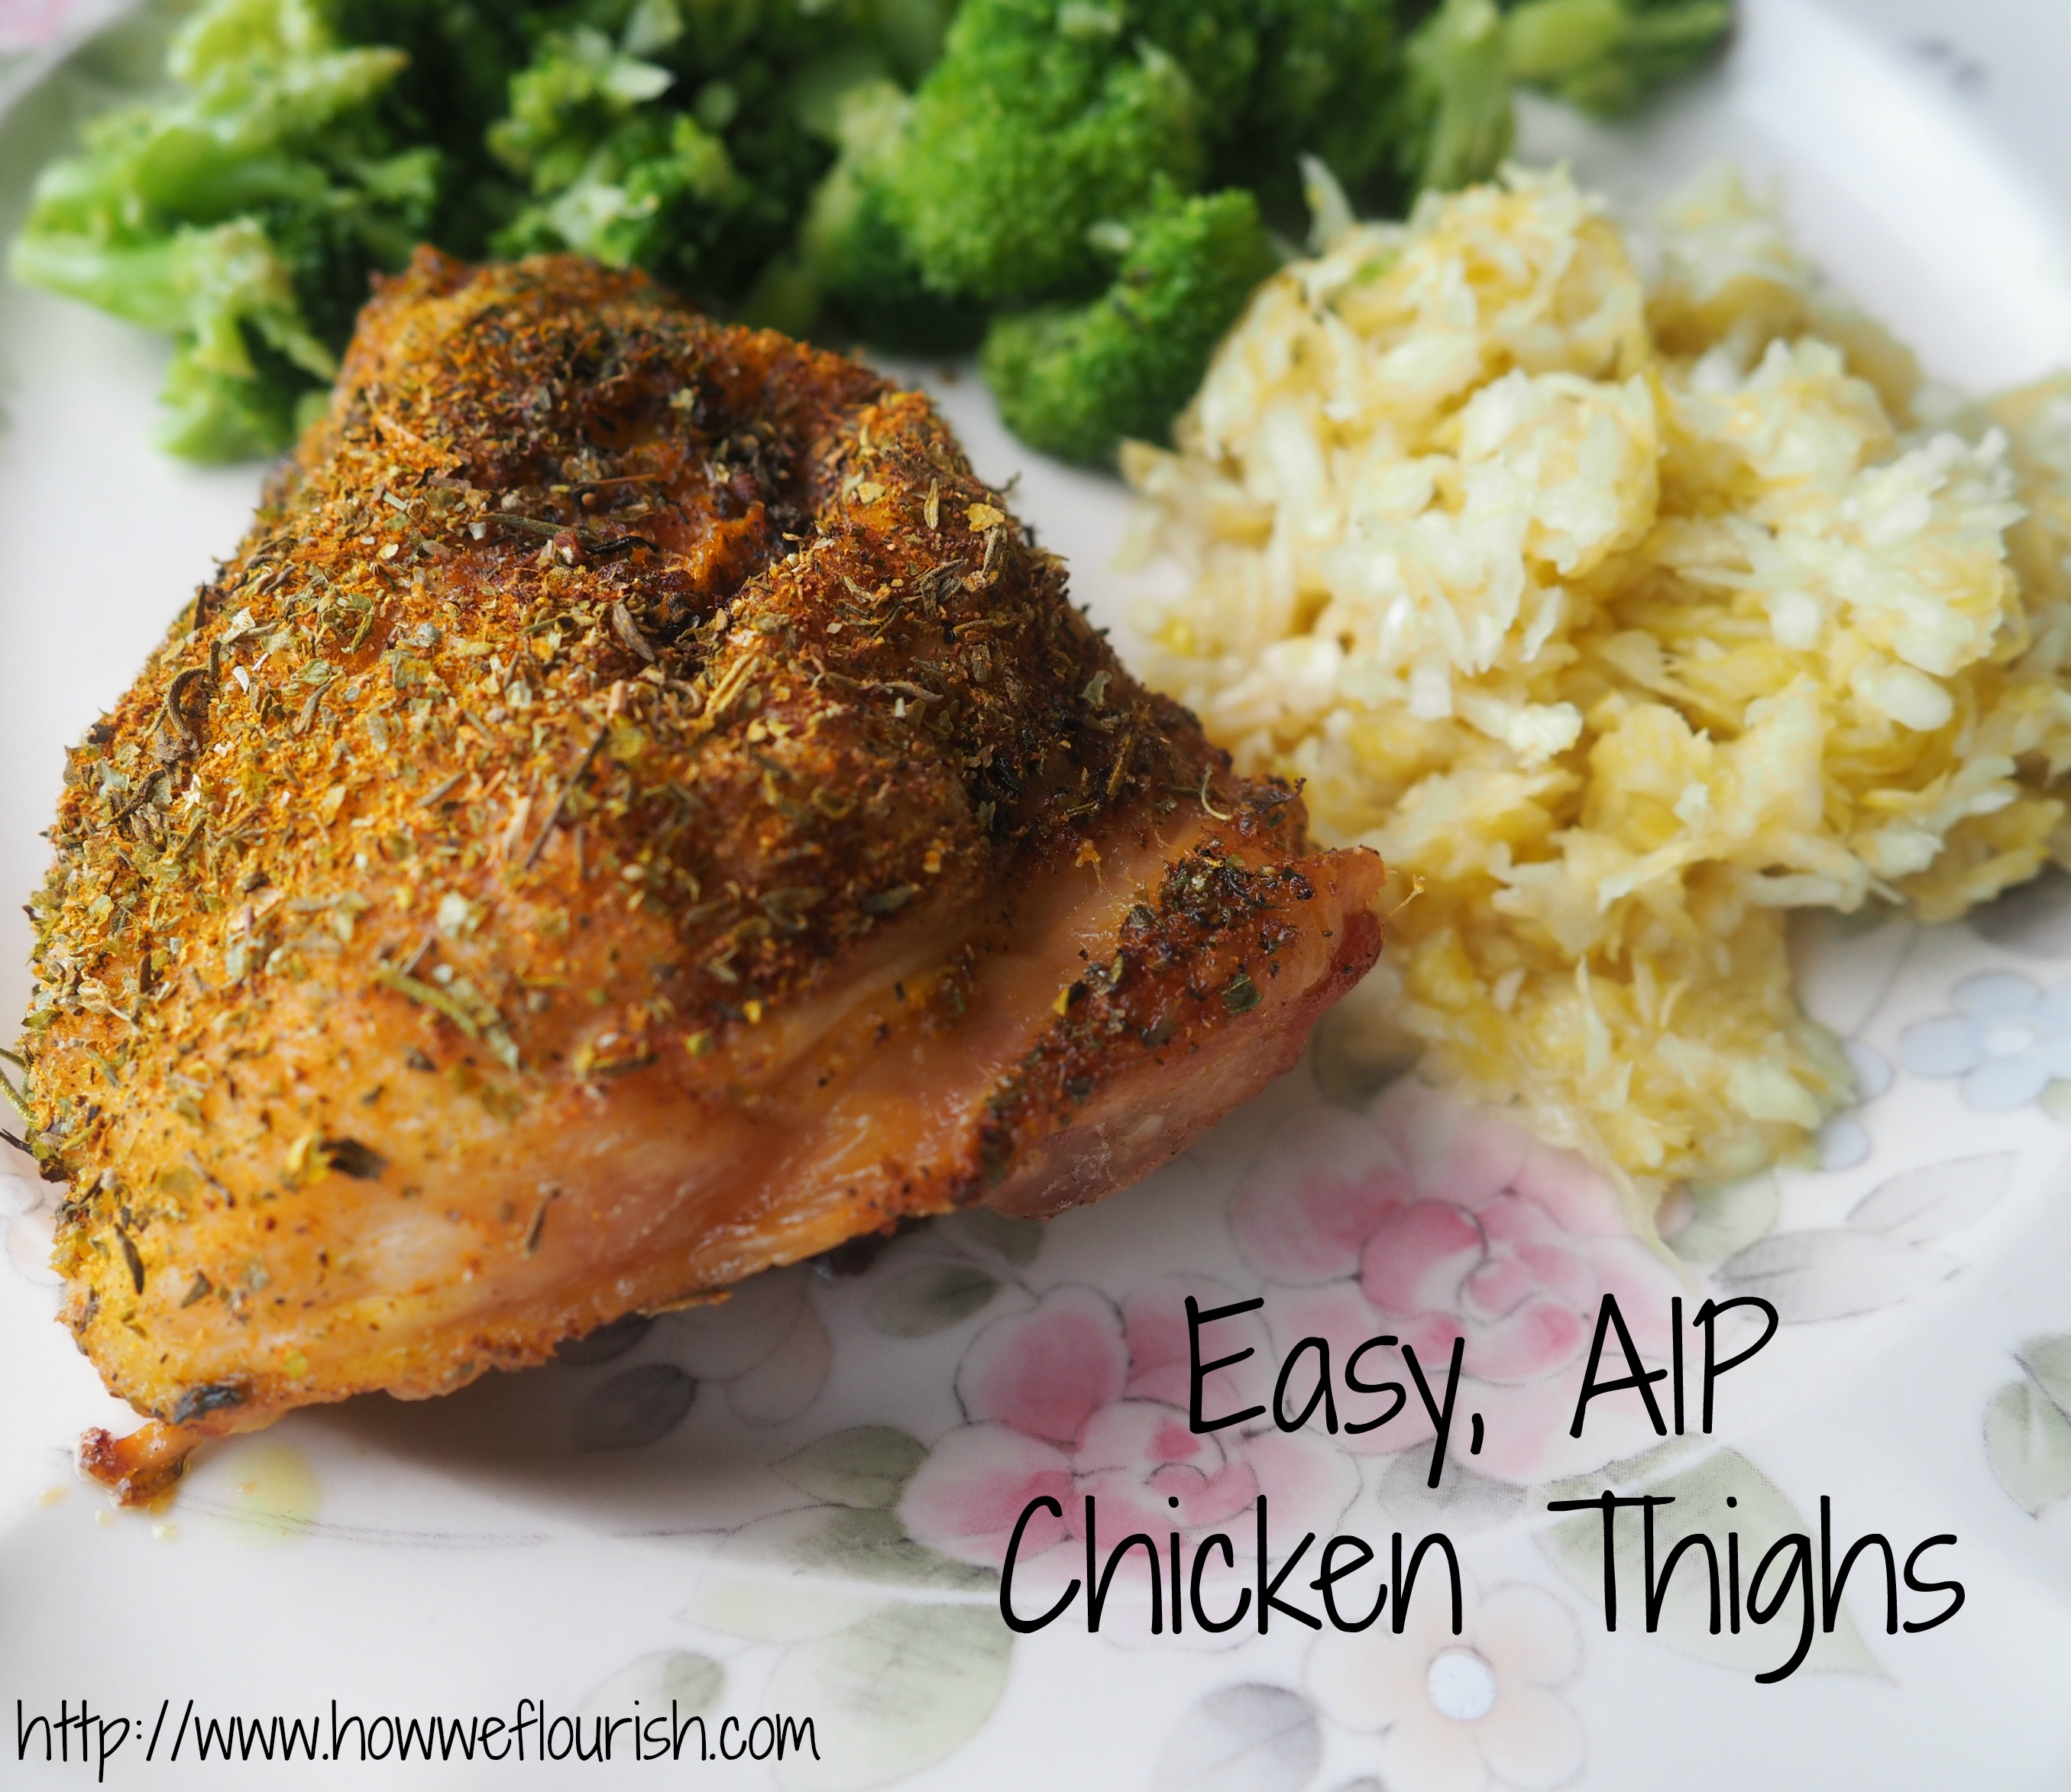 Easy AIP Chicken Thighs